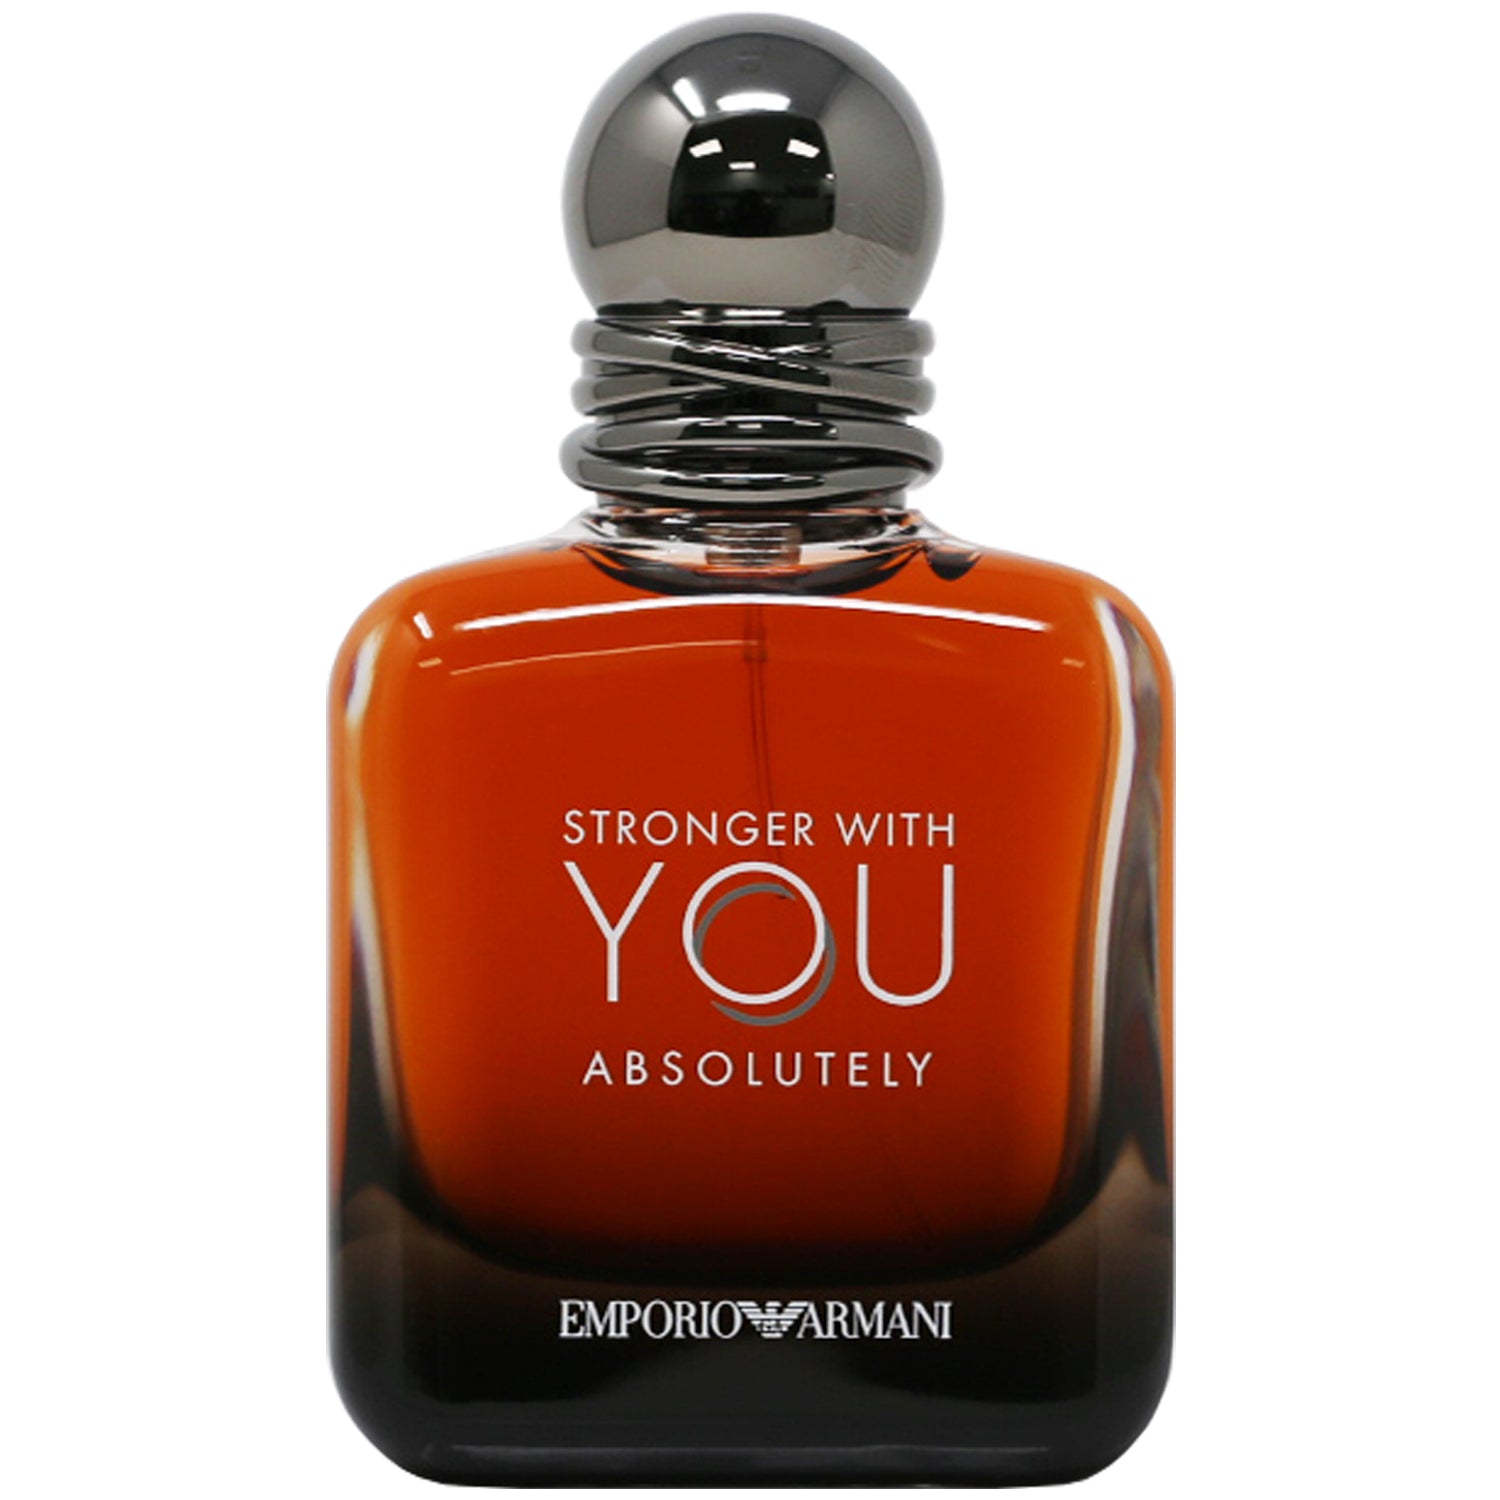 Stronger With You Absolutely by Emporio Armani in this compliment test